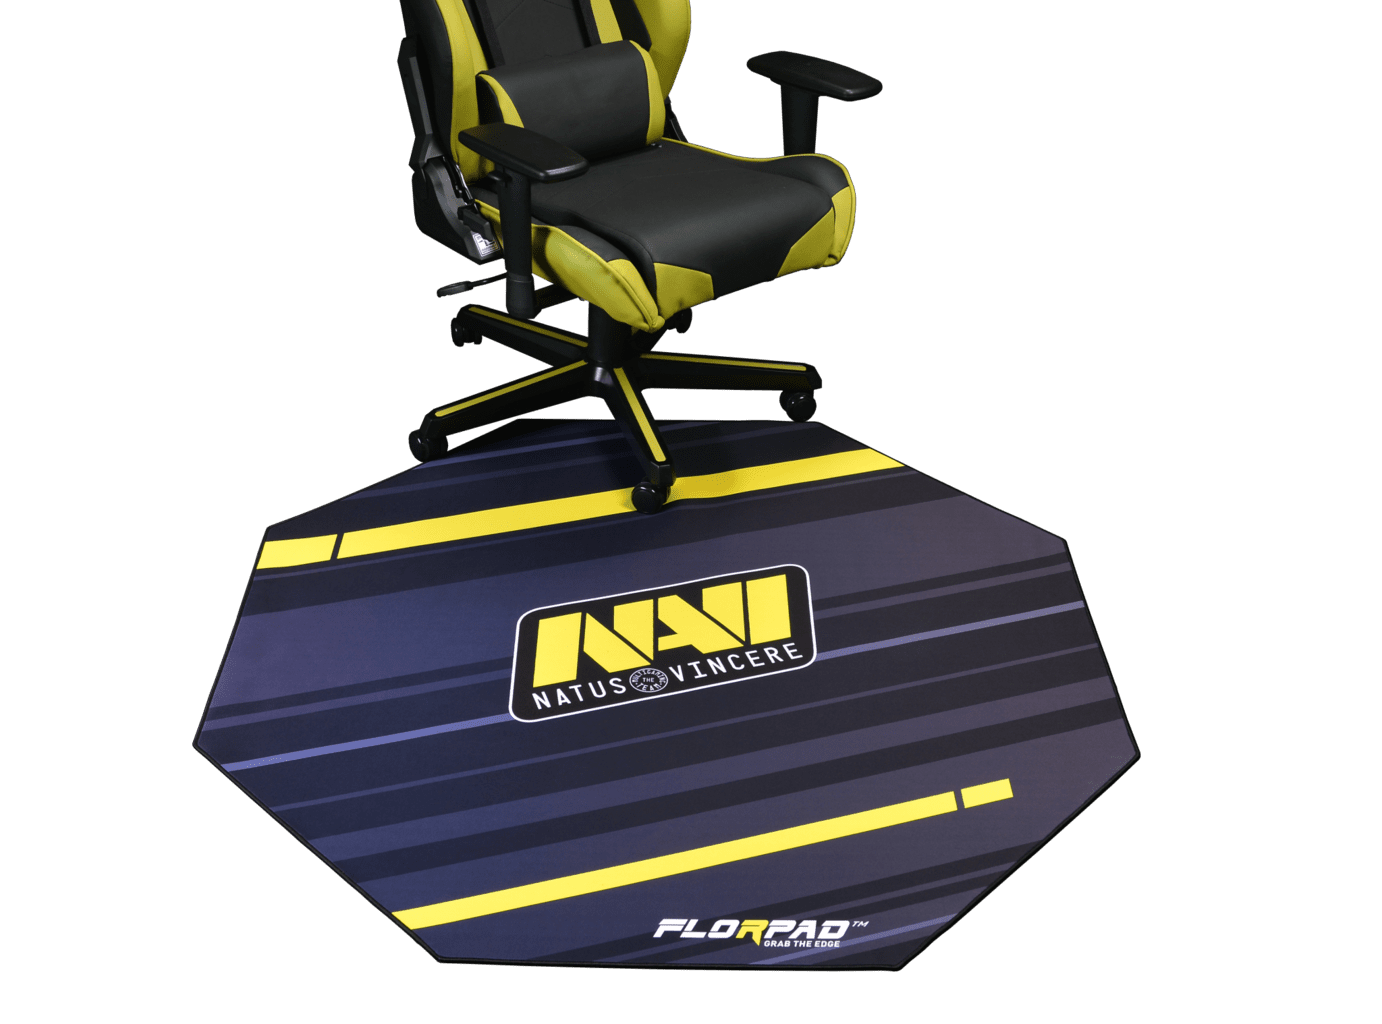 Flopard mats for gaming chairs